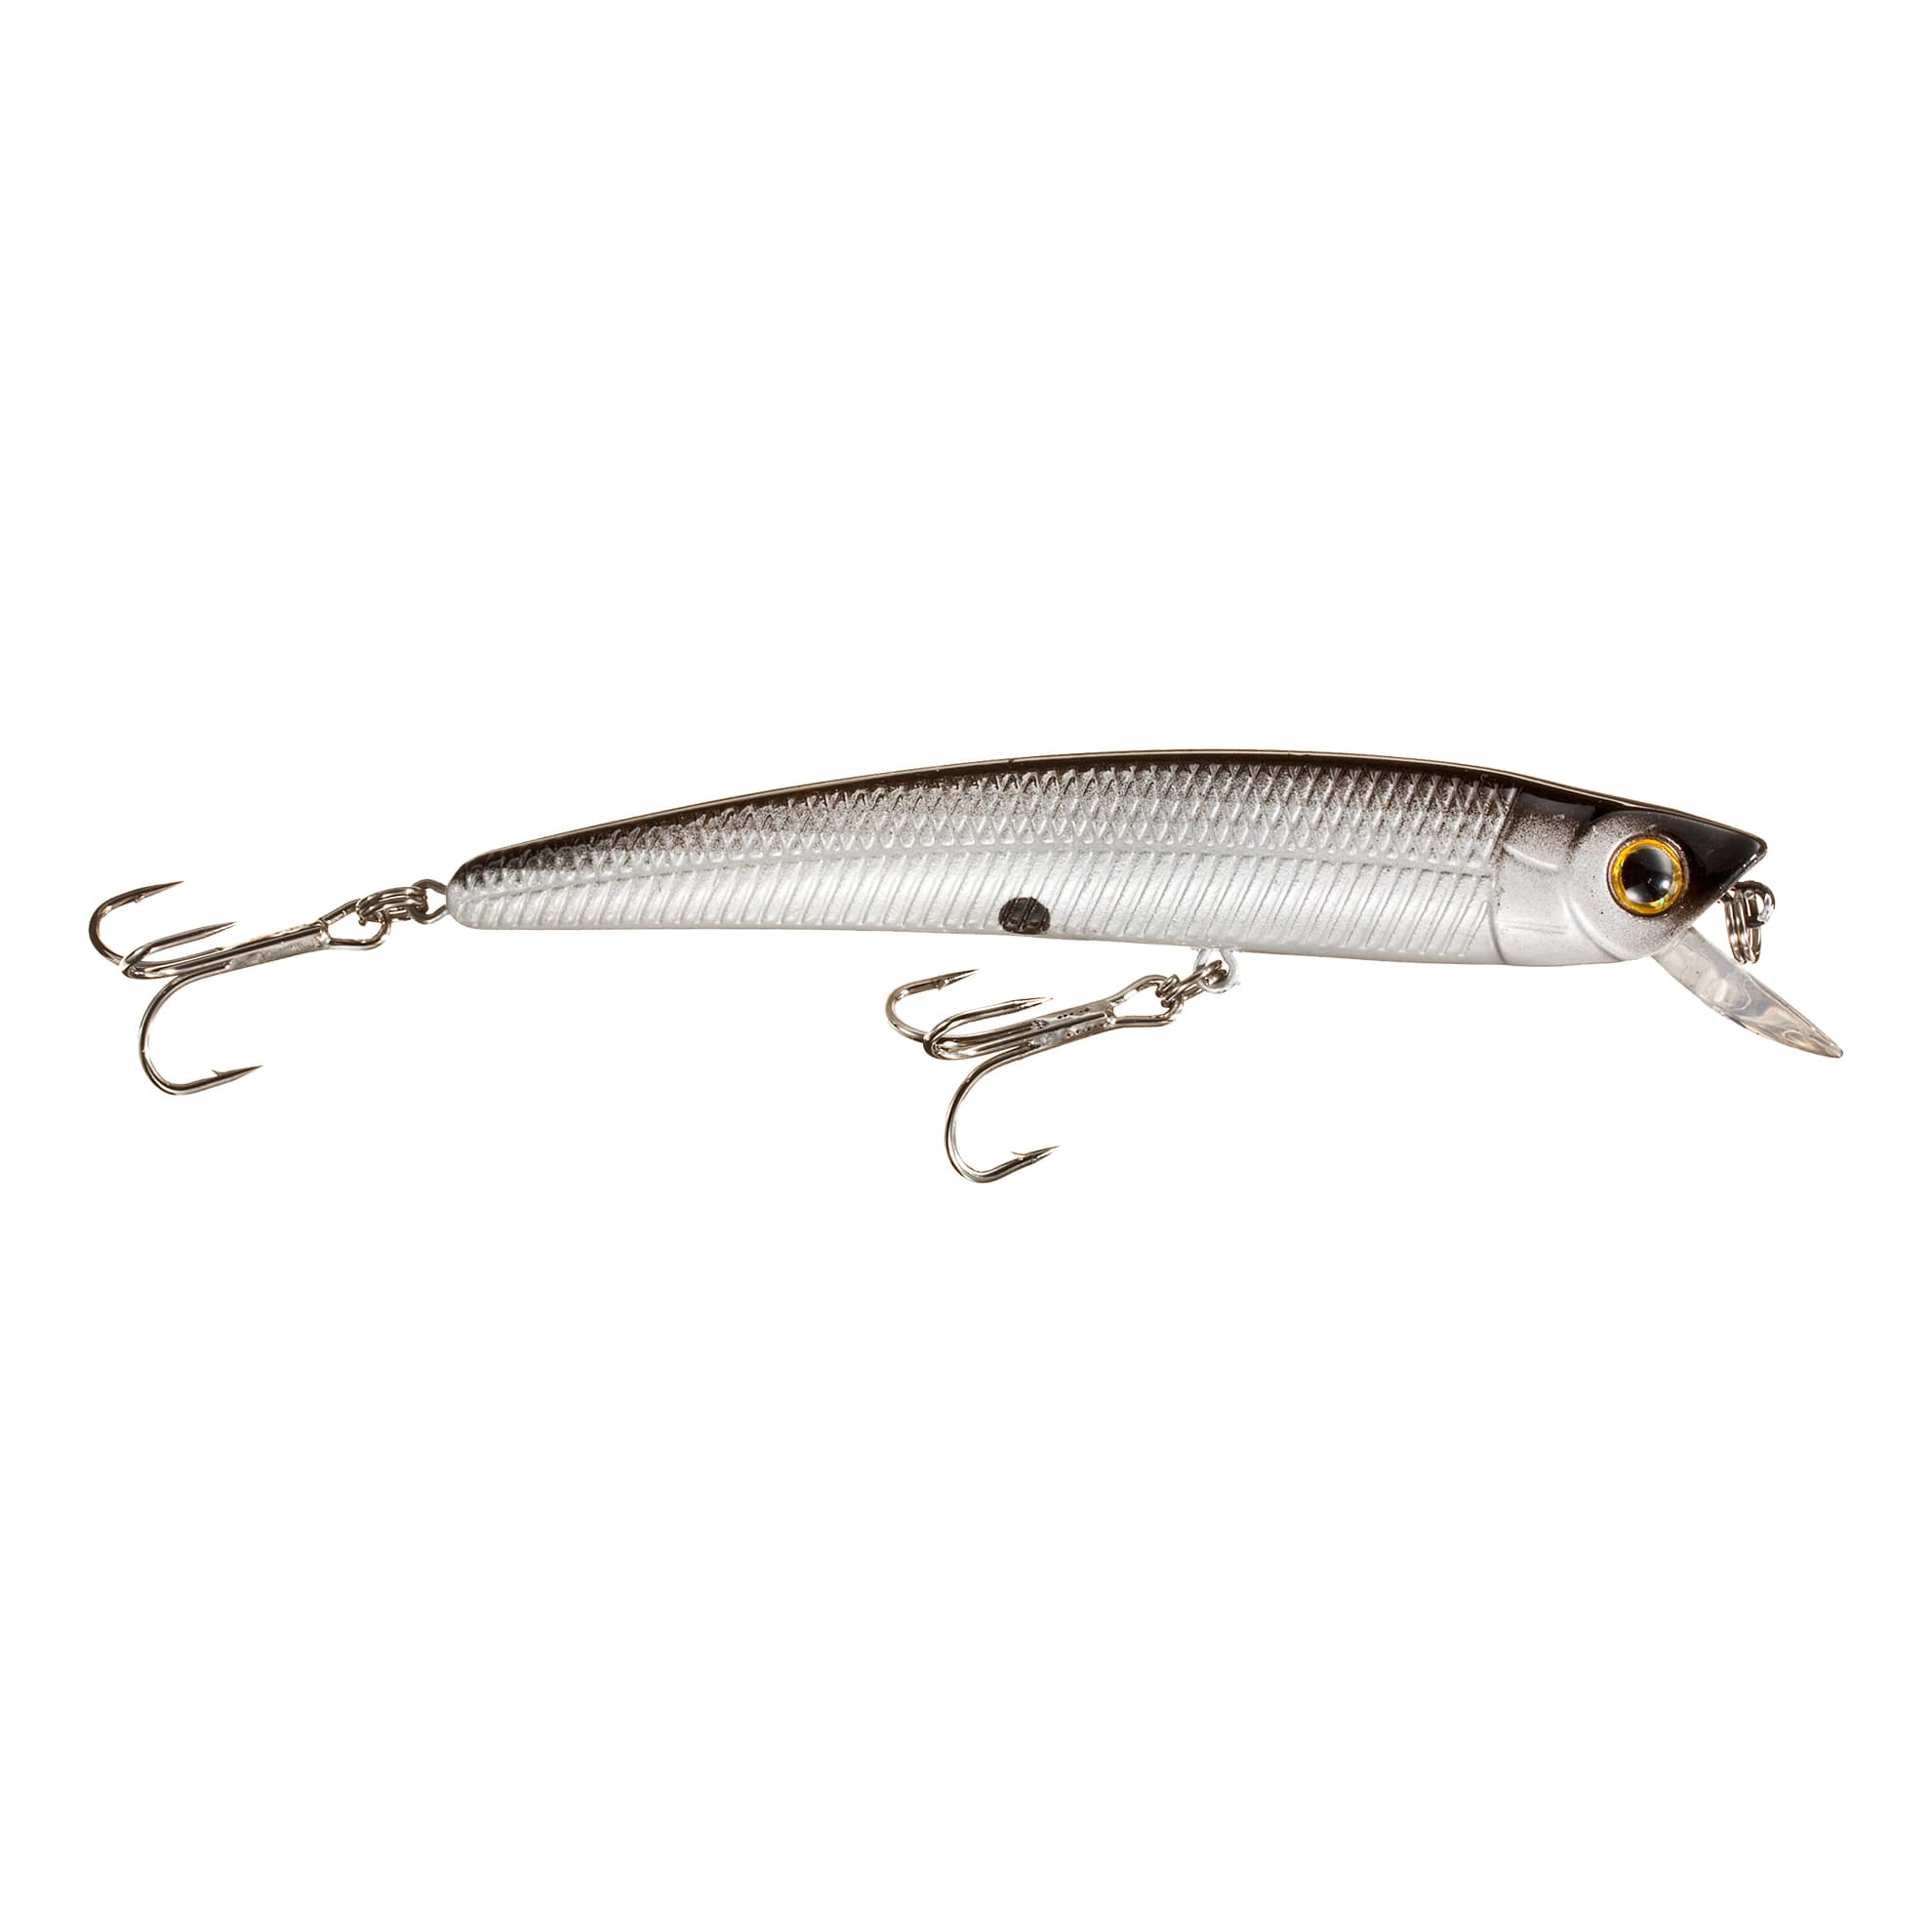 Bass Pro Shops® Tourney Special Minnow - Pearl Black Shad